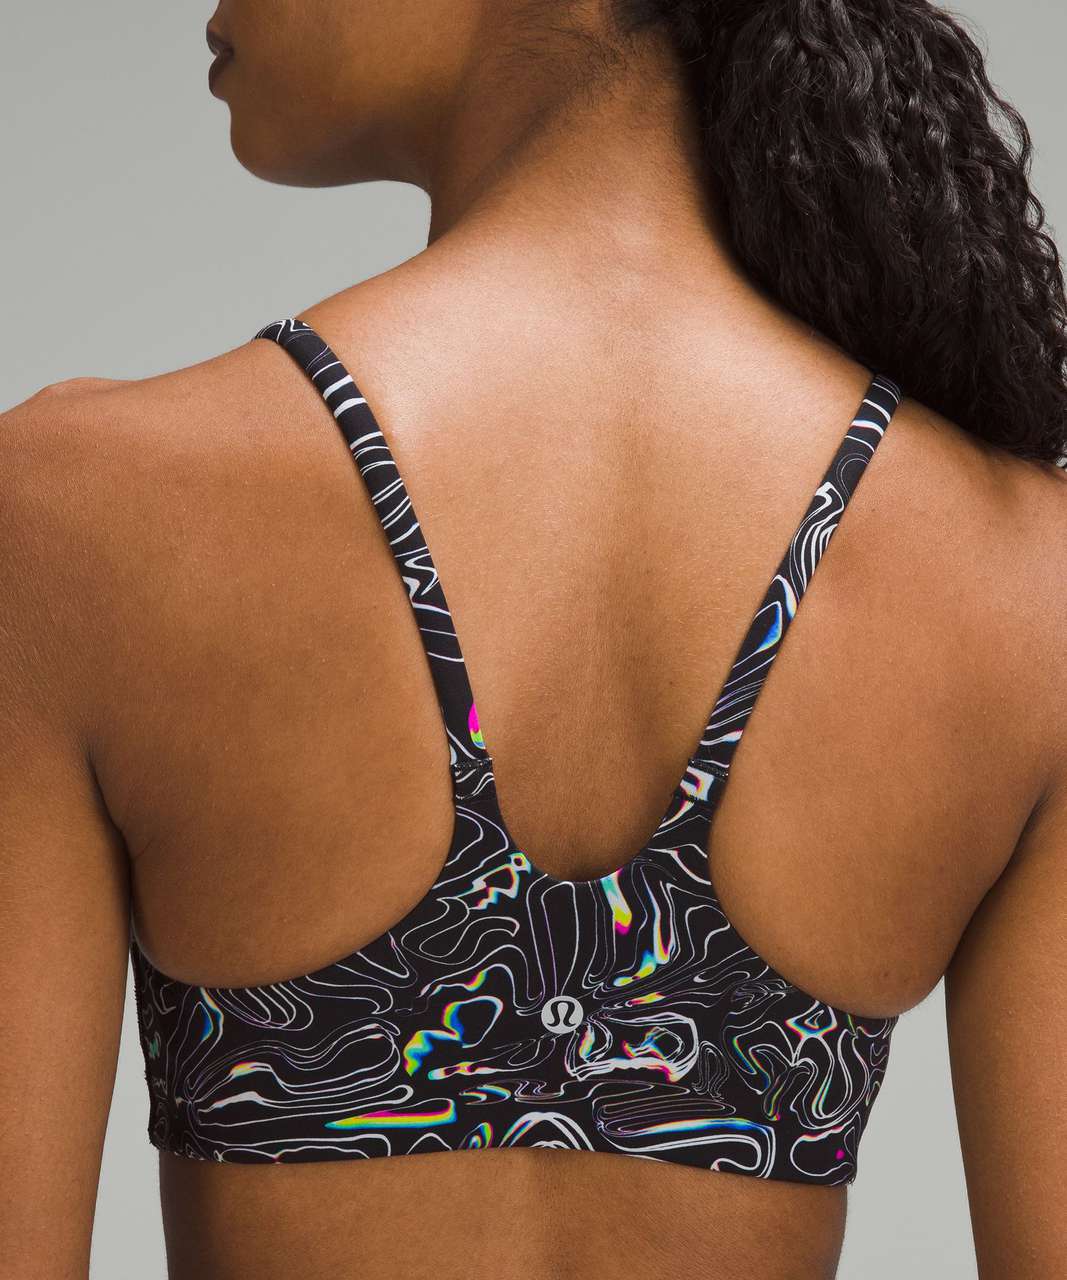 Lululemon Wunder Train Strappy Racer Bra *Light Support, A/B Cup - Daisyfied Yogo Moonbow Black